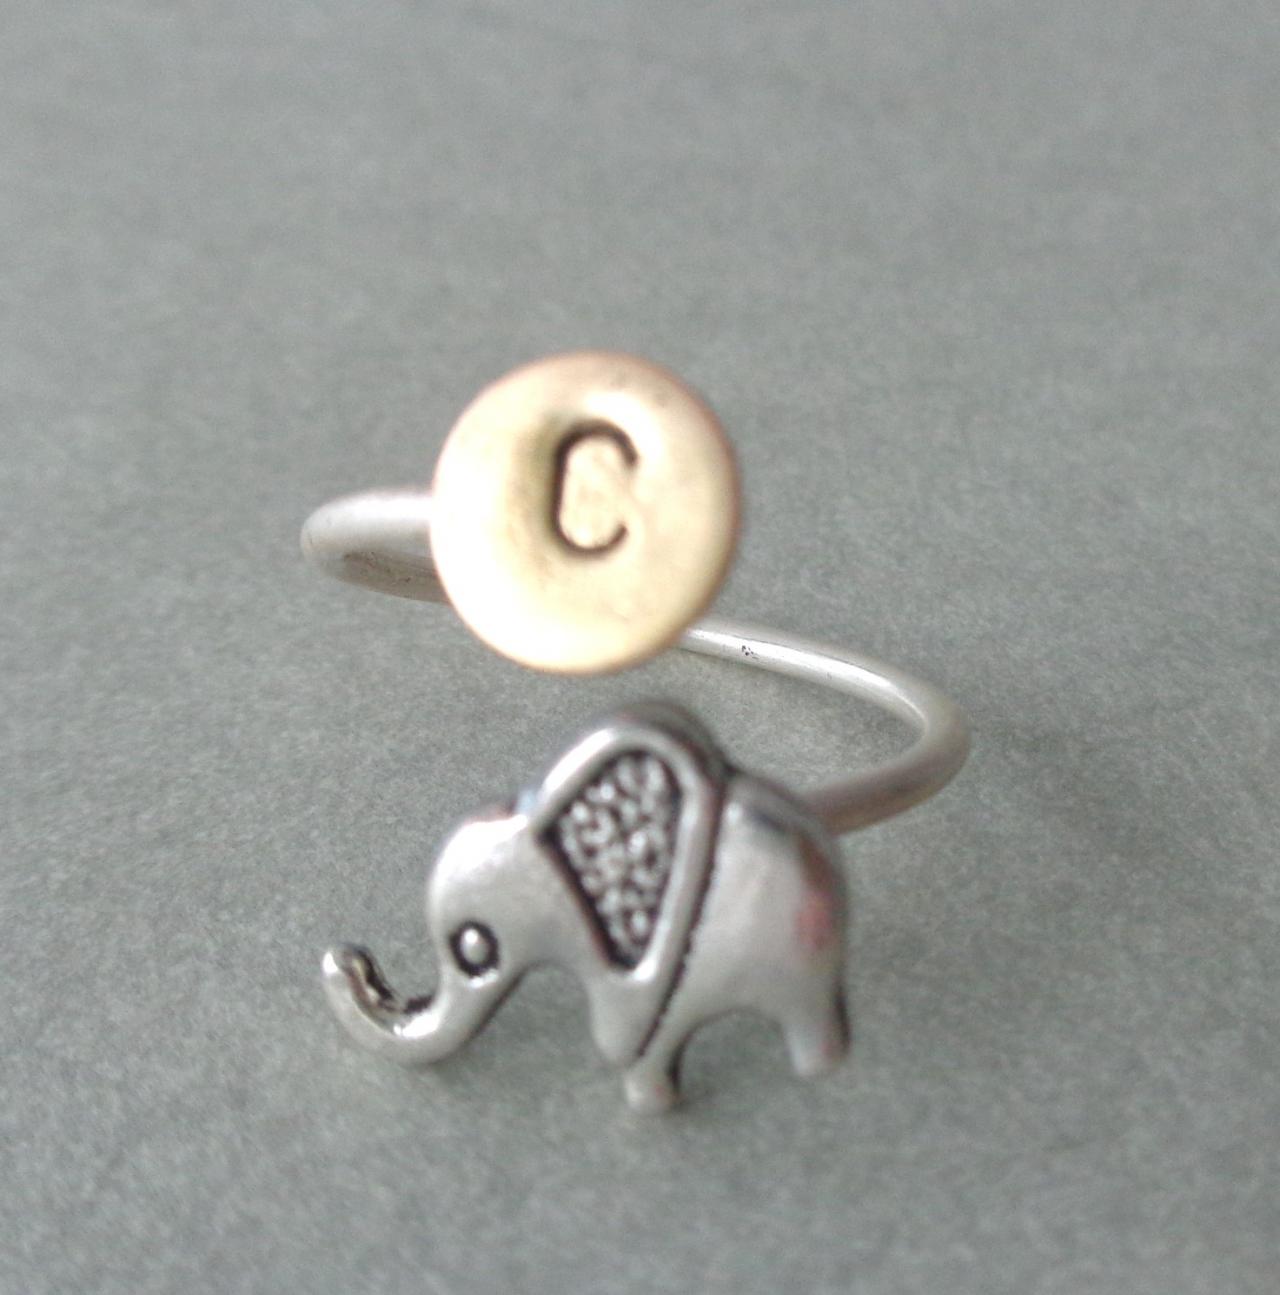 Silver Elephant Personalized Initials Ring, Adjustable Ring, Animal Ring